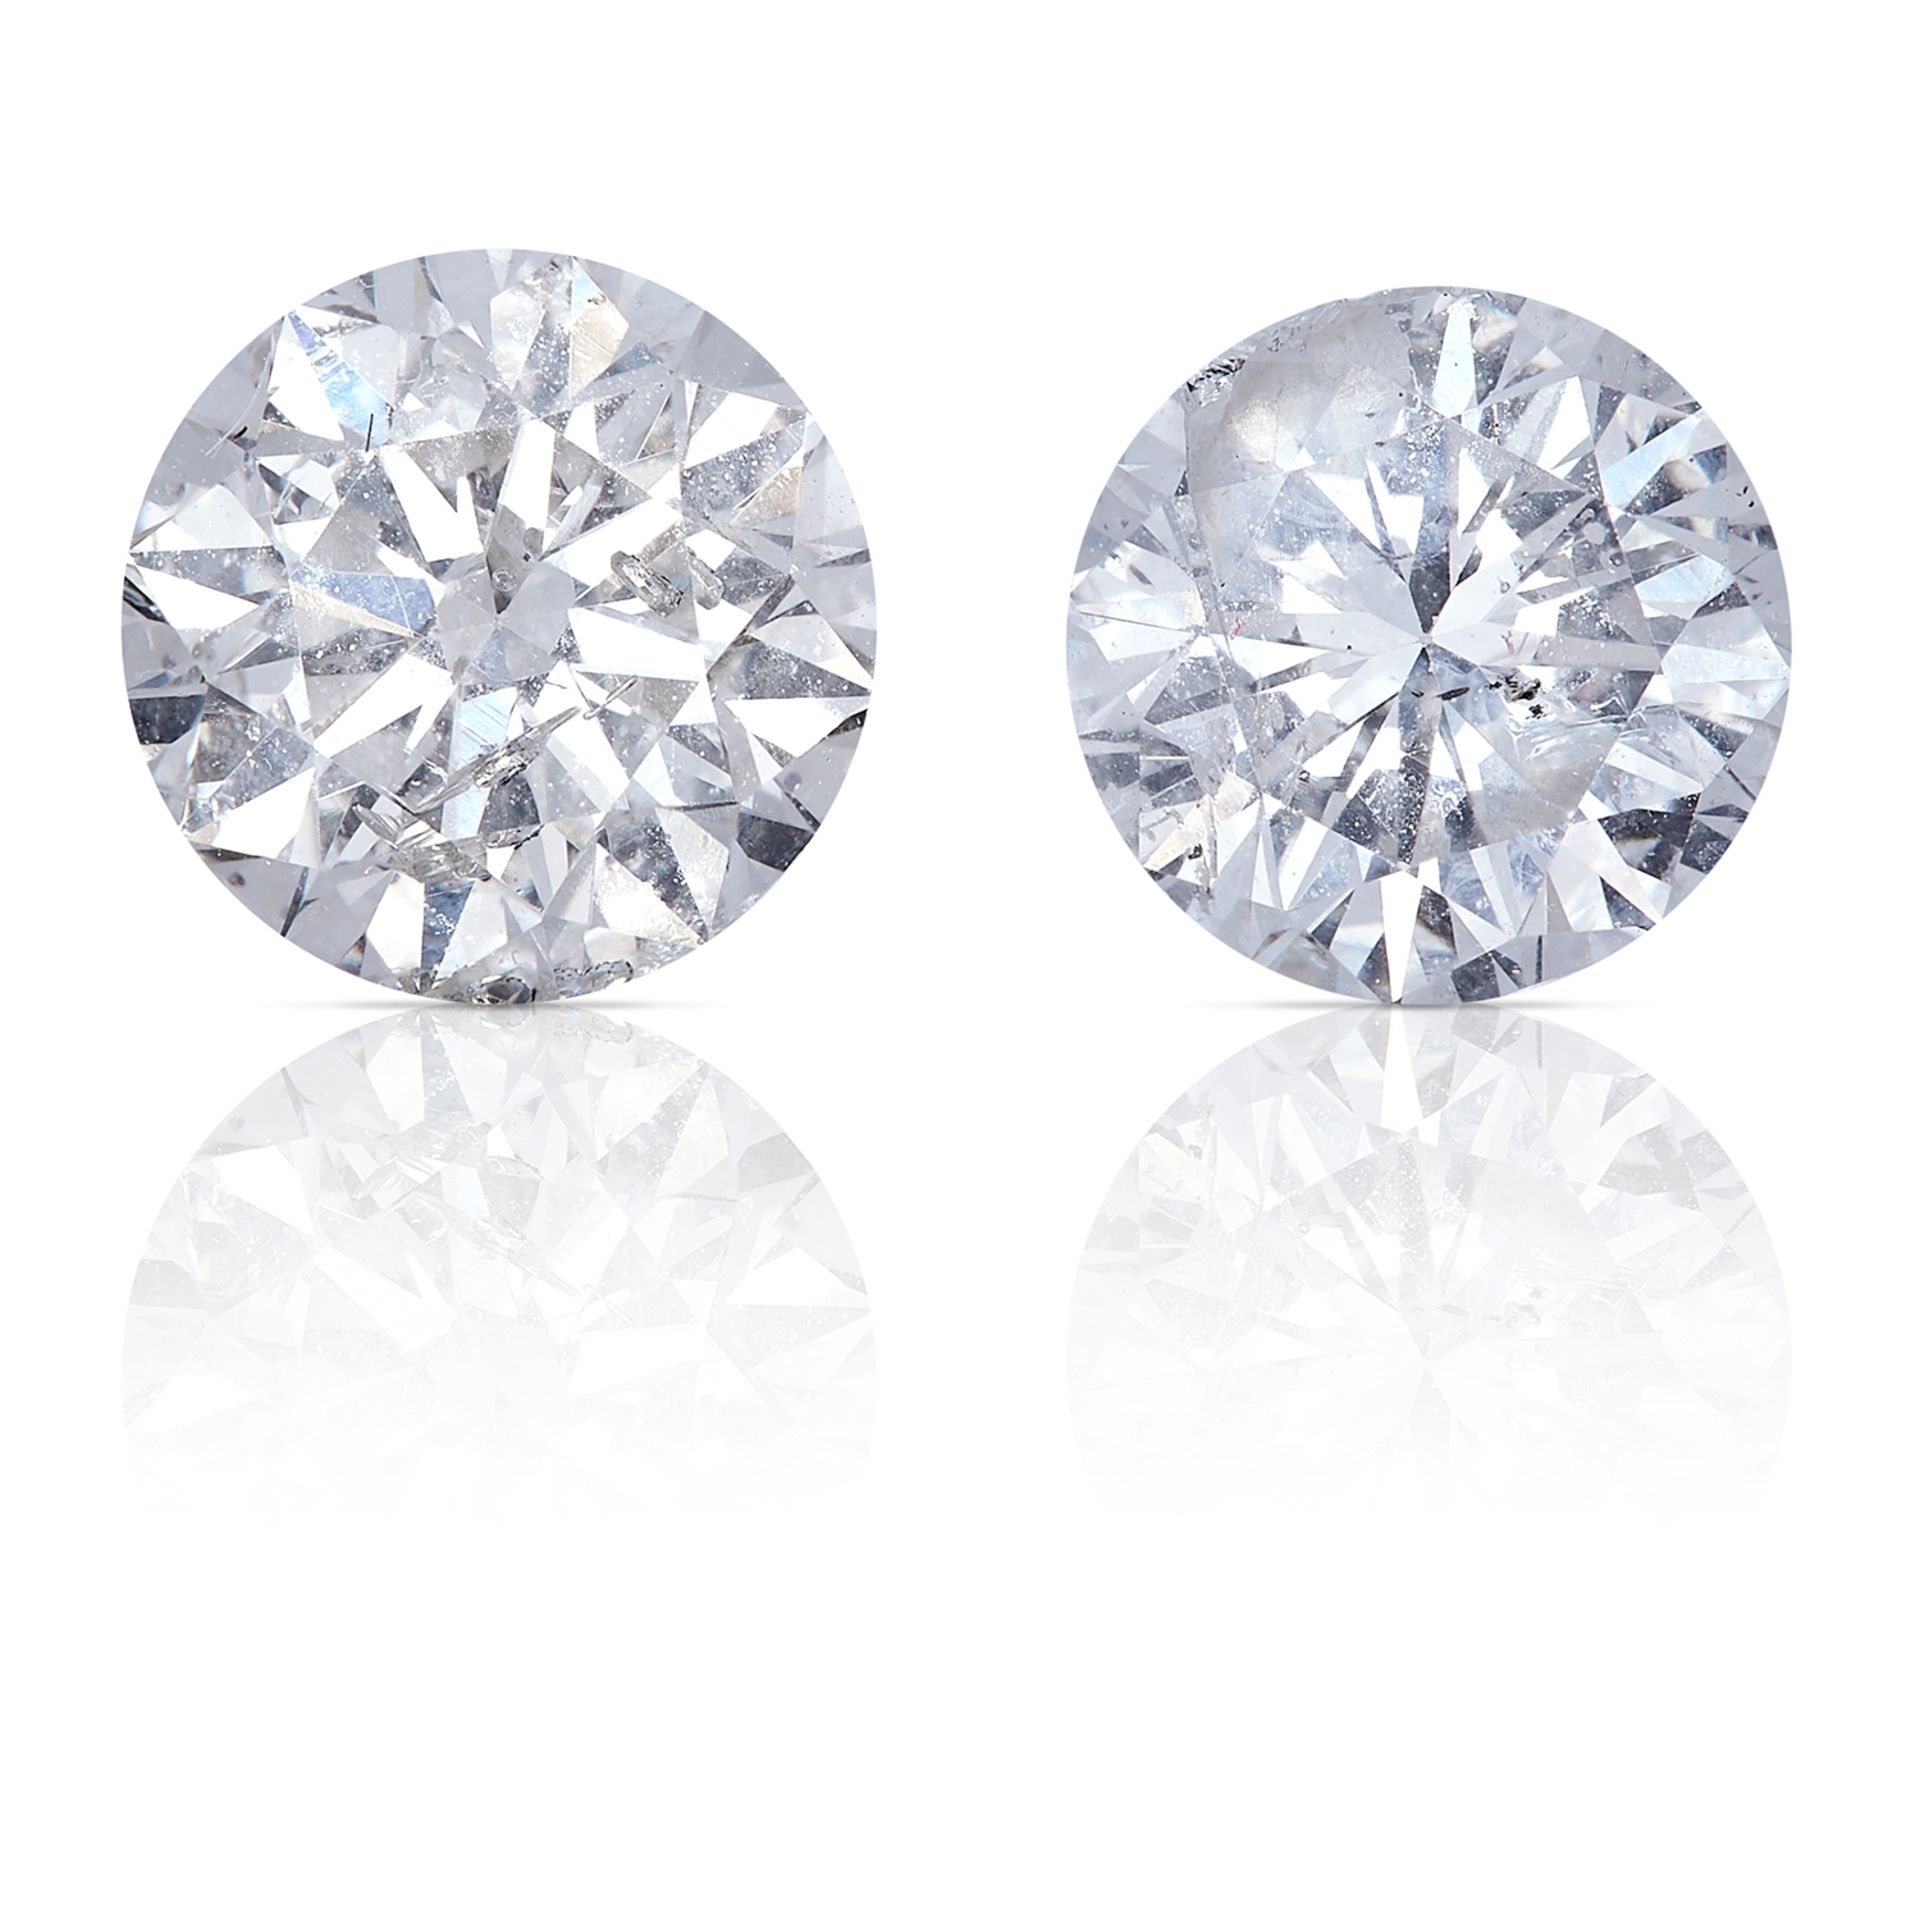 TWO ROUND CUT MODERN BRILLIANT DIAMONDS TOTALLING 1.56cts, UNMOUNTED.